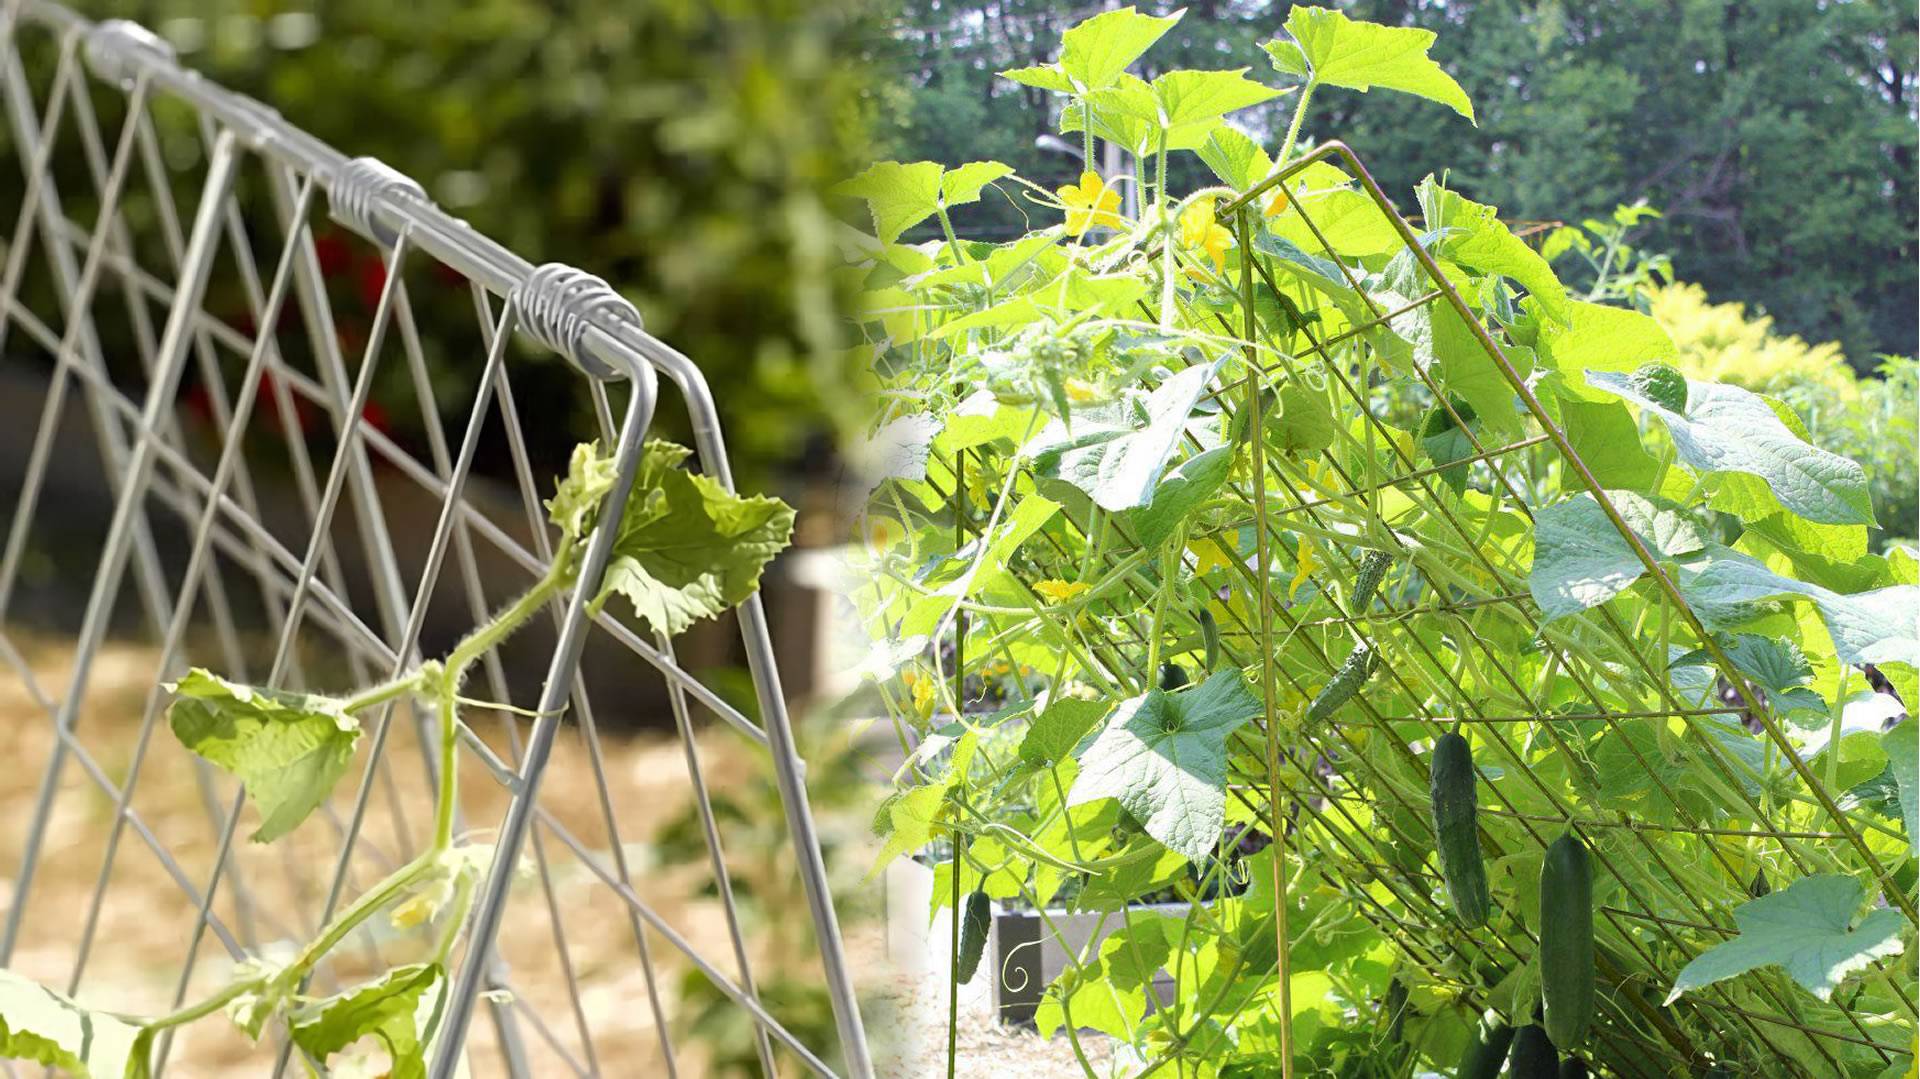 Manufacturer of metal garden trellis for vegetable and flowers support.